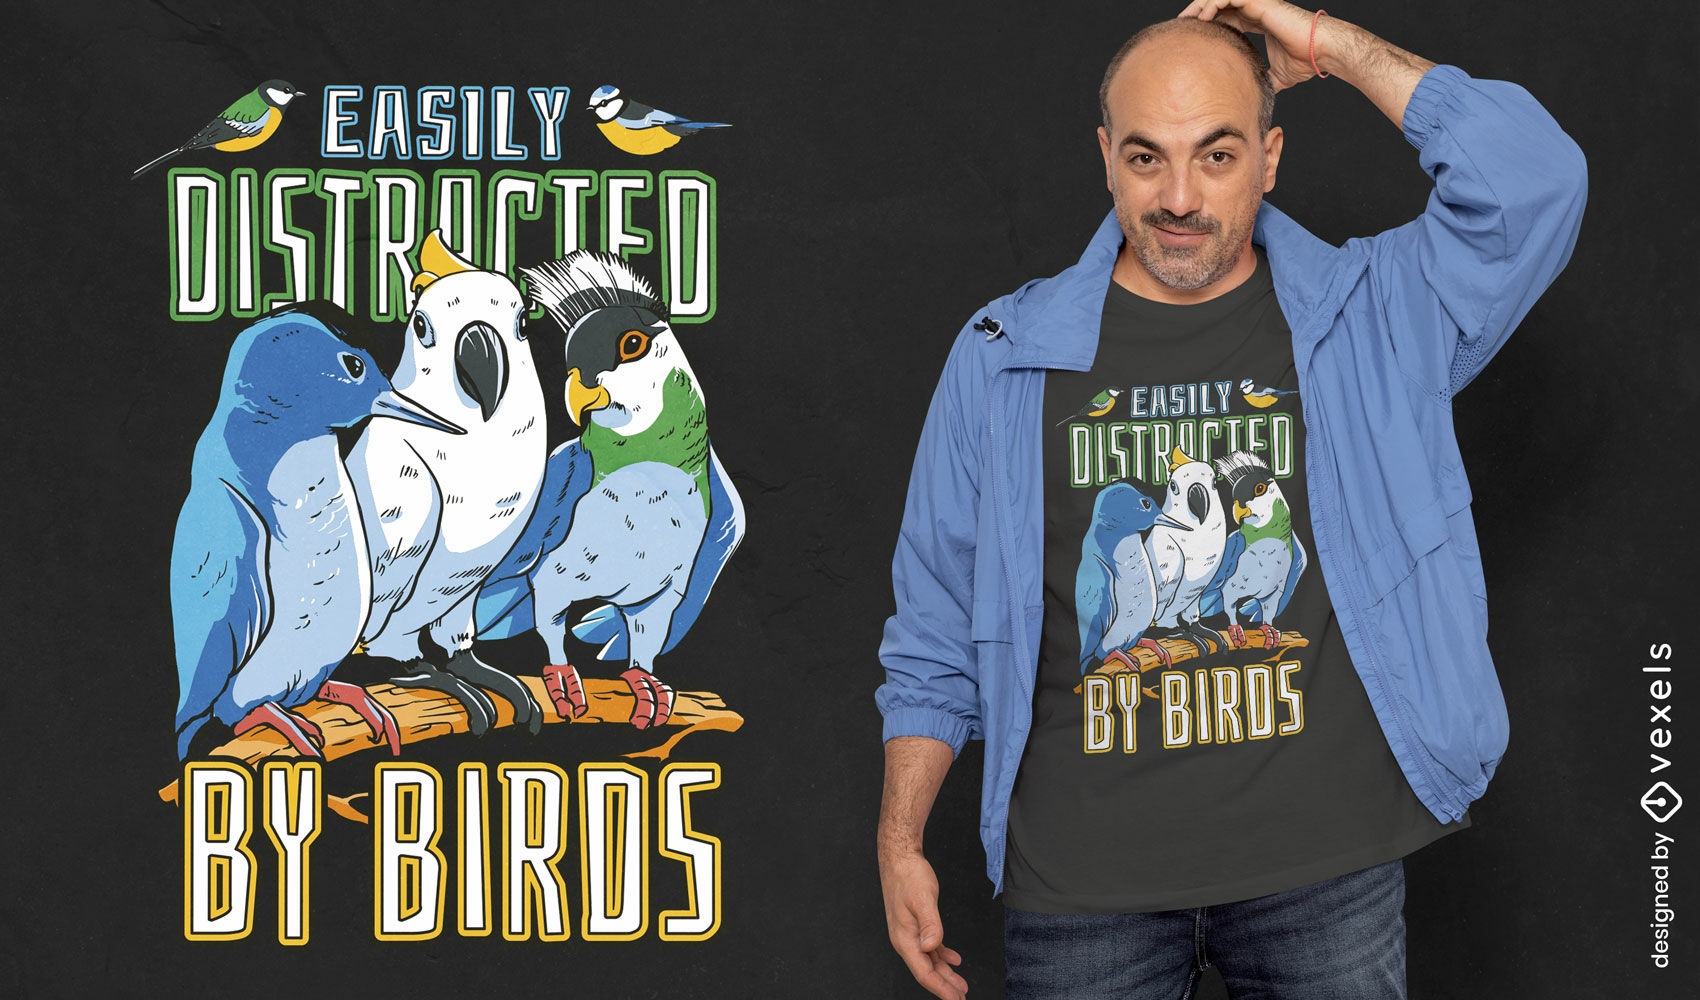 Distracted by birds t-shirt design